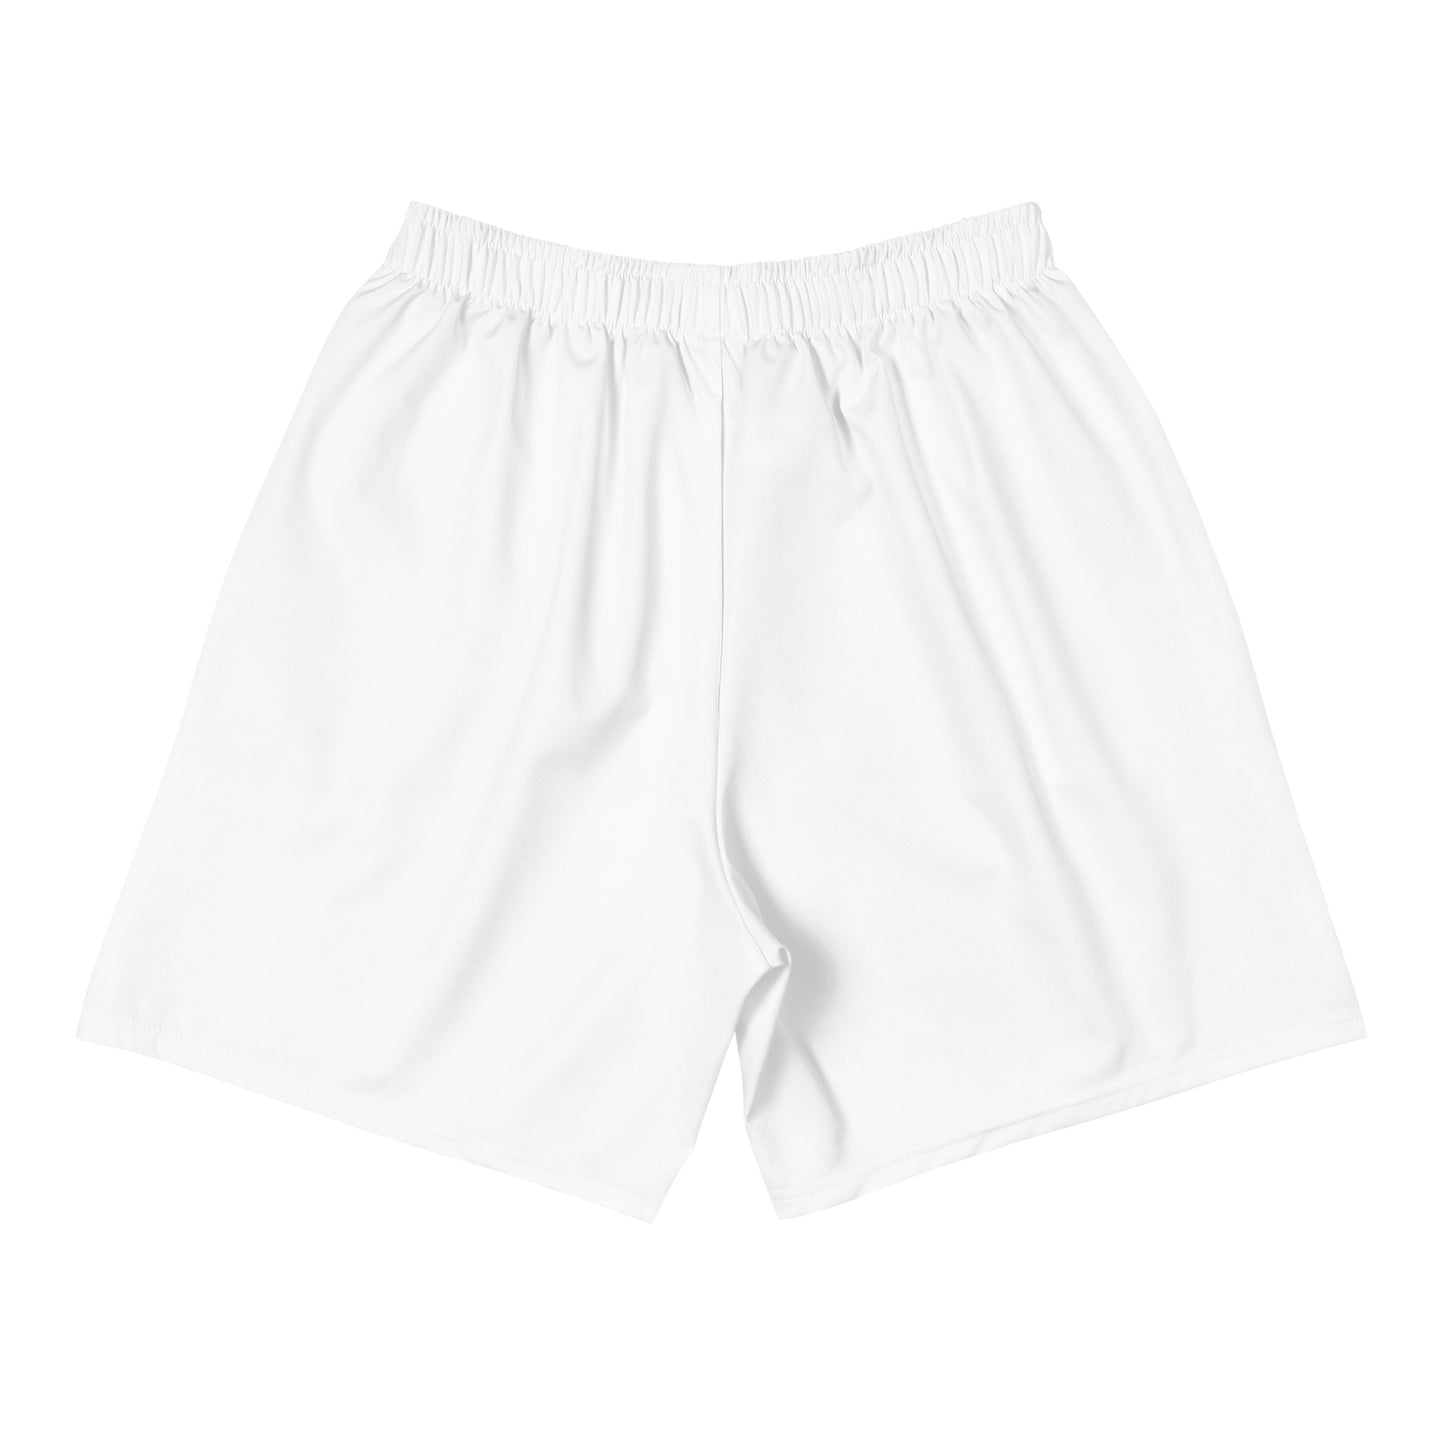 WhT/Teal Hip Suffer Athletic Shorts